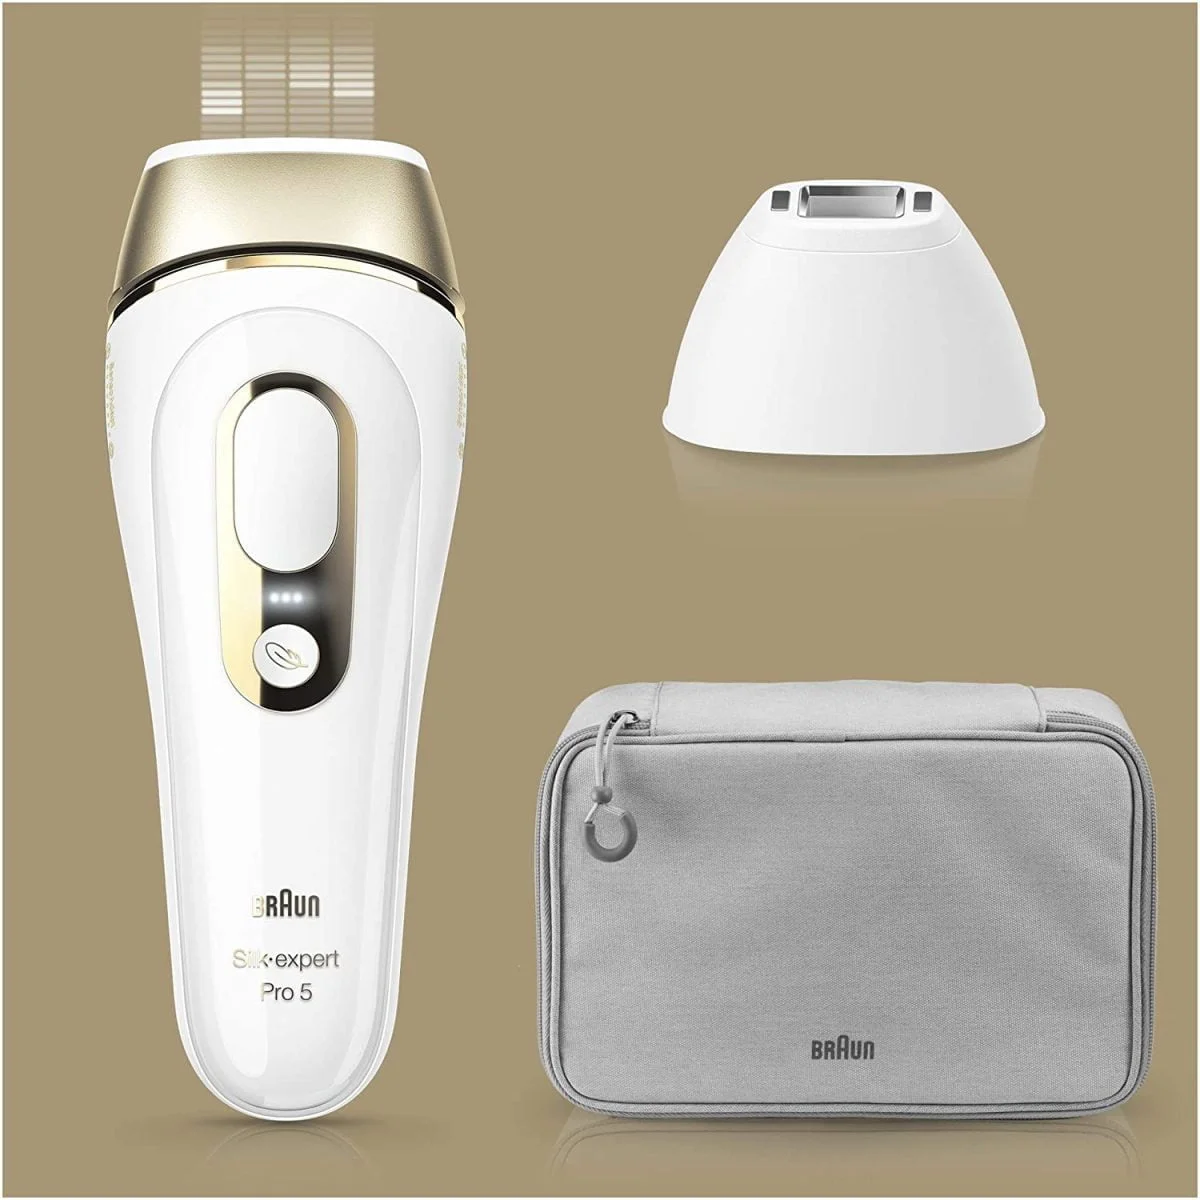 817Xuzrlqvl. Ac Sl1500 Braun &Lt;H1&Gt;Braun Silk Expert Pro 5 Pl5117 Latest Generation Ipl, Permanent Hair Removal&Lt;/H1&Gt; Https://Www.youtube.com/Watch?V=N-T6D6Jn588 &Lt;Ul Class=&Quot;A-Unordered-List A-Vertical A-Spacing-Mini&Quot;&Gt; &Lt;Li&Gt;&Lt;Span Class=&Quot;A-List-Item&Quot;&Gt;Braun’s Latest Generation Ipl. The Safest, Fastest And Most Efficient Ipl*. Permanent Hair Reduction In Just 4 Weeks*. &Lt;/Span&Gt;&Lt;/Li&Gt; &Lt;Li&Gt;&Lt;Span Class=&Quot;A-List-Item&Quot;&Gt; The Safest Ipl Technology. Clinically Tested And Dermatologically Accredited As Skin Safe By An International Skin Health Organization (Skin Health Alliance) &Lt;/Span&Gt;&Lt;/Li&Gt; &Lt;Li&Gt;&Lt;Span Class=&Quot;A-List-Item&Quot;&Gt; Smart Ipl With Sensoadapttm Skin Sensor (With Uv Protection): The Only Ipl Technology That Automatically And Continuously Adapts To Your Skin Tone &Lt;/Span&Gt;&Lt;/Li&Gt; &Lt;Li&Gt;&Lt;Span Class=&Quot;A-List-Item&Quot;&Gt; The Fastest Ipl: Treat Both Legs In Less Than 5 Minutes At The Lowest Energy Level. 2 Times Faster Than The Previous Silk·expert 5. Includes Precision Head, Premium Pouch And Venus Razor &Lt;/Span&Gt;&Lt;/Li&Gt; &Lt;Li&Gt;&Lt;Span Class=&Quot;A-List-Item&Quot;&Gt; New Compact Design, 15% Smaller And 25% Lighter, For Easy Handling And Effortless Treatment. 4, Flashes, 3% More Than Previous Silk·expert 5 &Lt;/Span&Gt;&Lt;/Li&Gt; &Lt;Li&Gt;&Lt;Span Class=&Quot;A-List-Item&Quot;&Gt; Also Suitable For Men: The Silk-Expert Pro Is The Perfect Tool To Tackle Hair On The Chest, Back, Arms, Stomach And Legs&Lt;/Span&Gt;&Lt;/Li&Gt; &Lt;Li&Gt;400,000 Flashes In Total&Lt;/Li&Gt; &Lt;/Ul&Gt; Braun Silk Expert Pro 5 Braun Silk Expert Pro 5 - Pl5117